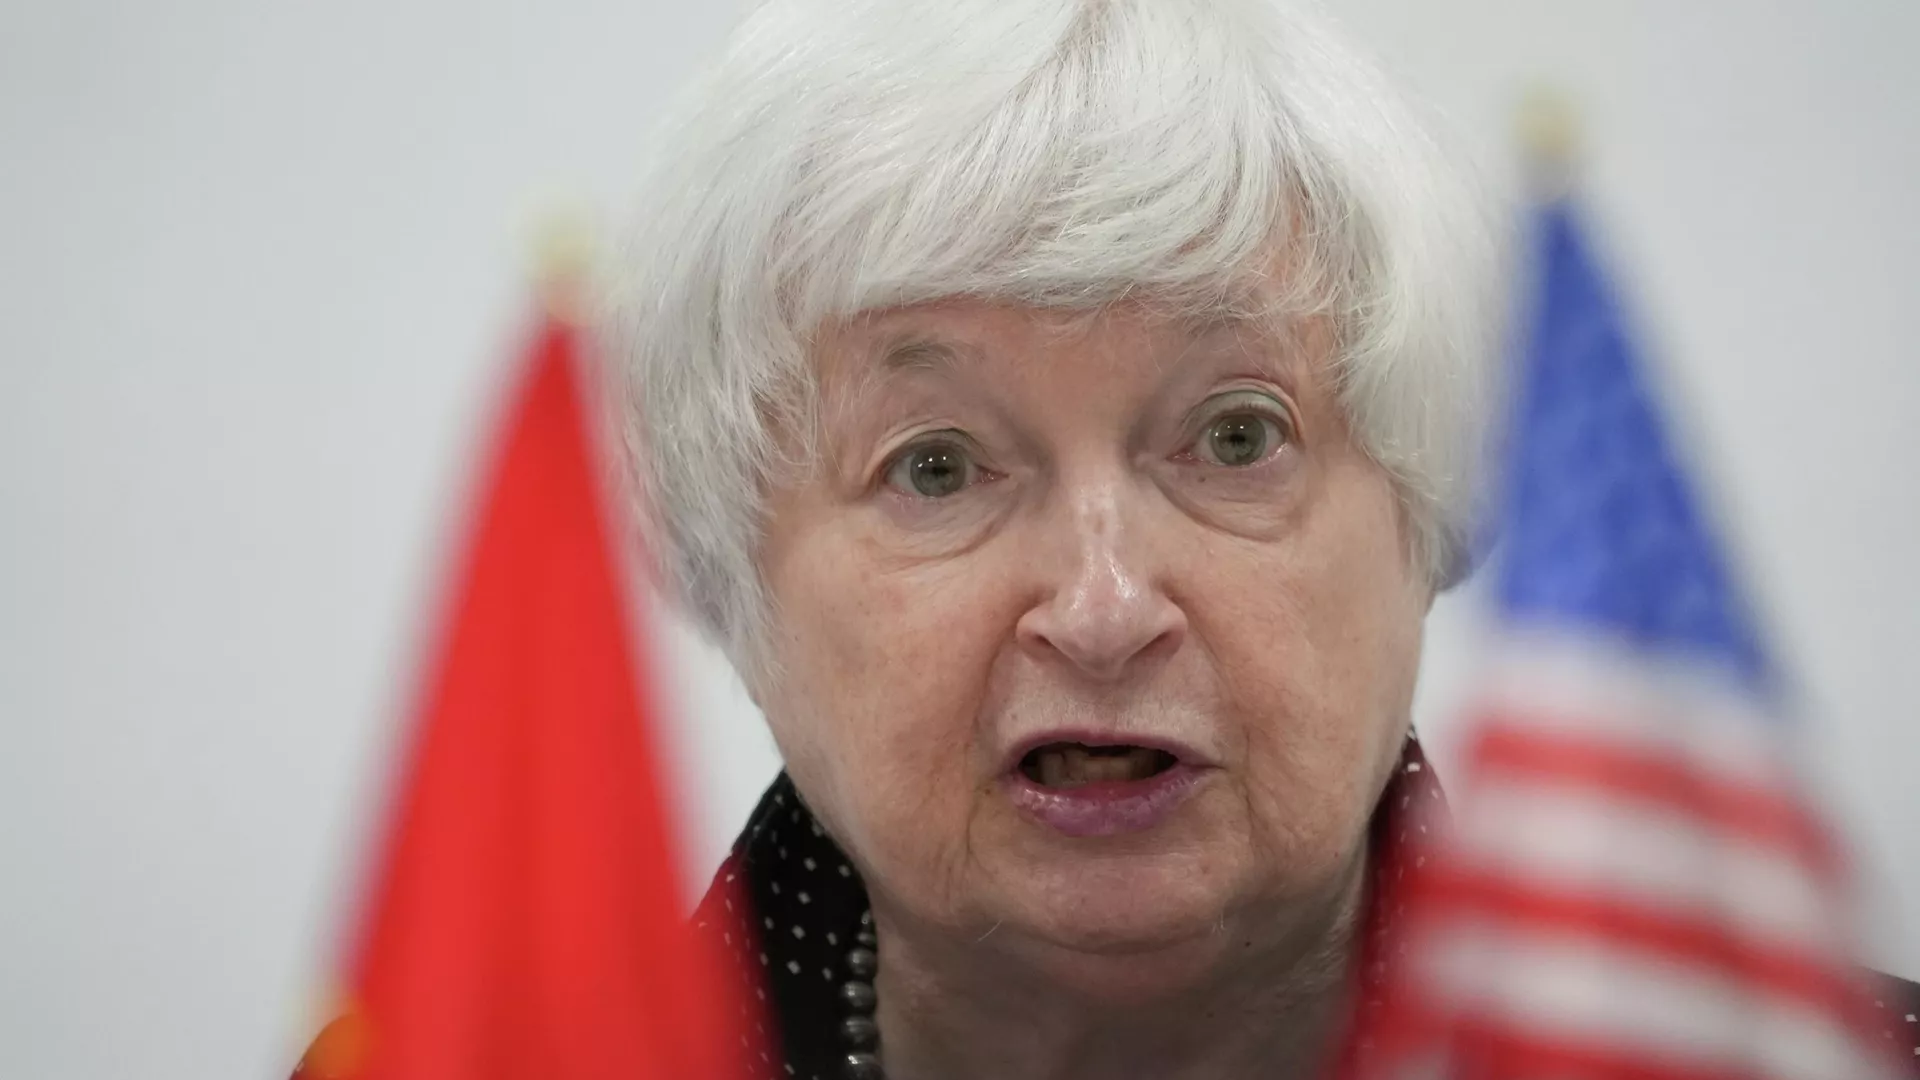 Yellen Says Ukraine’s Defeat Would Be Fault of the US – Reports